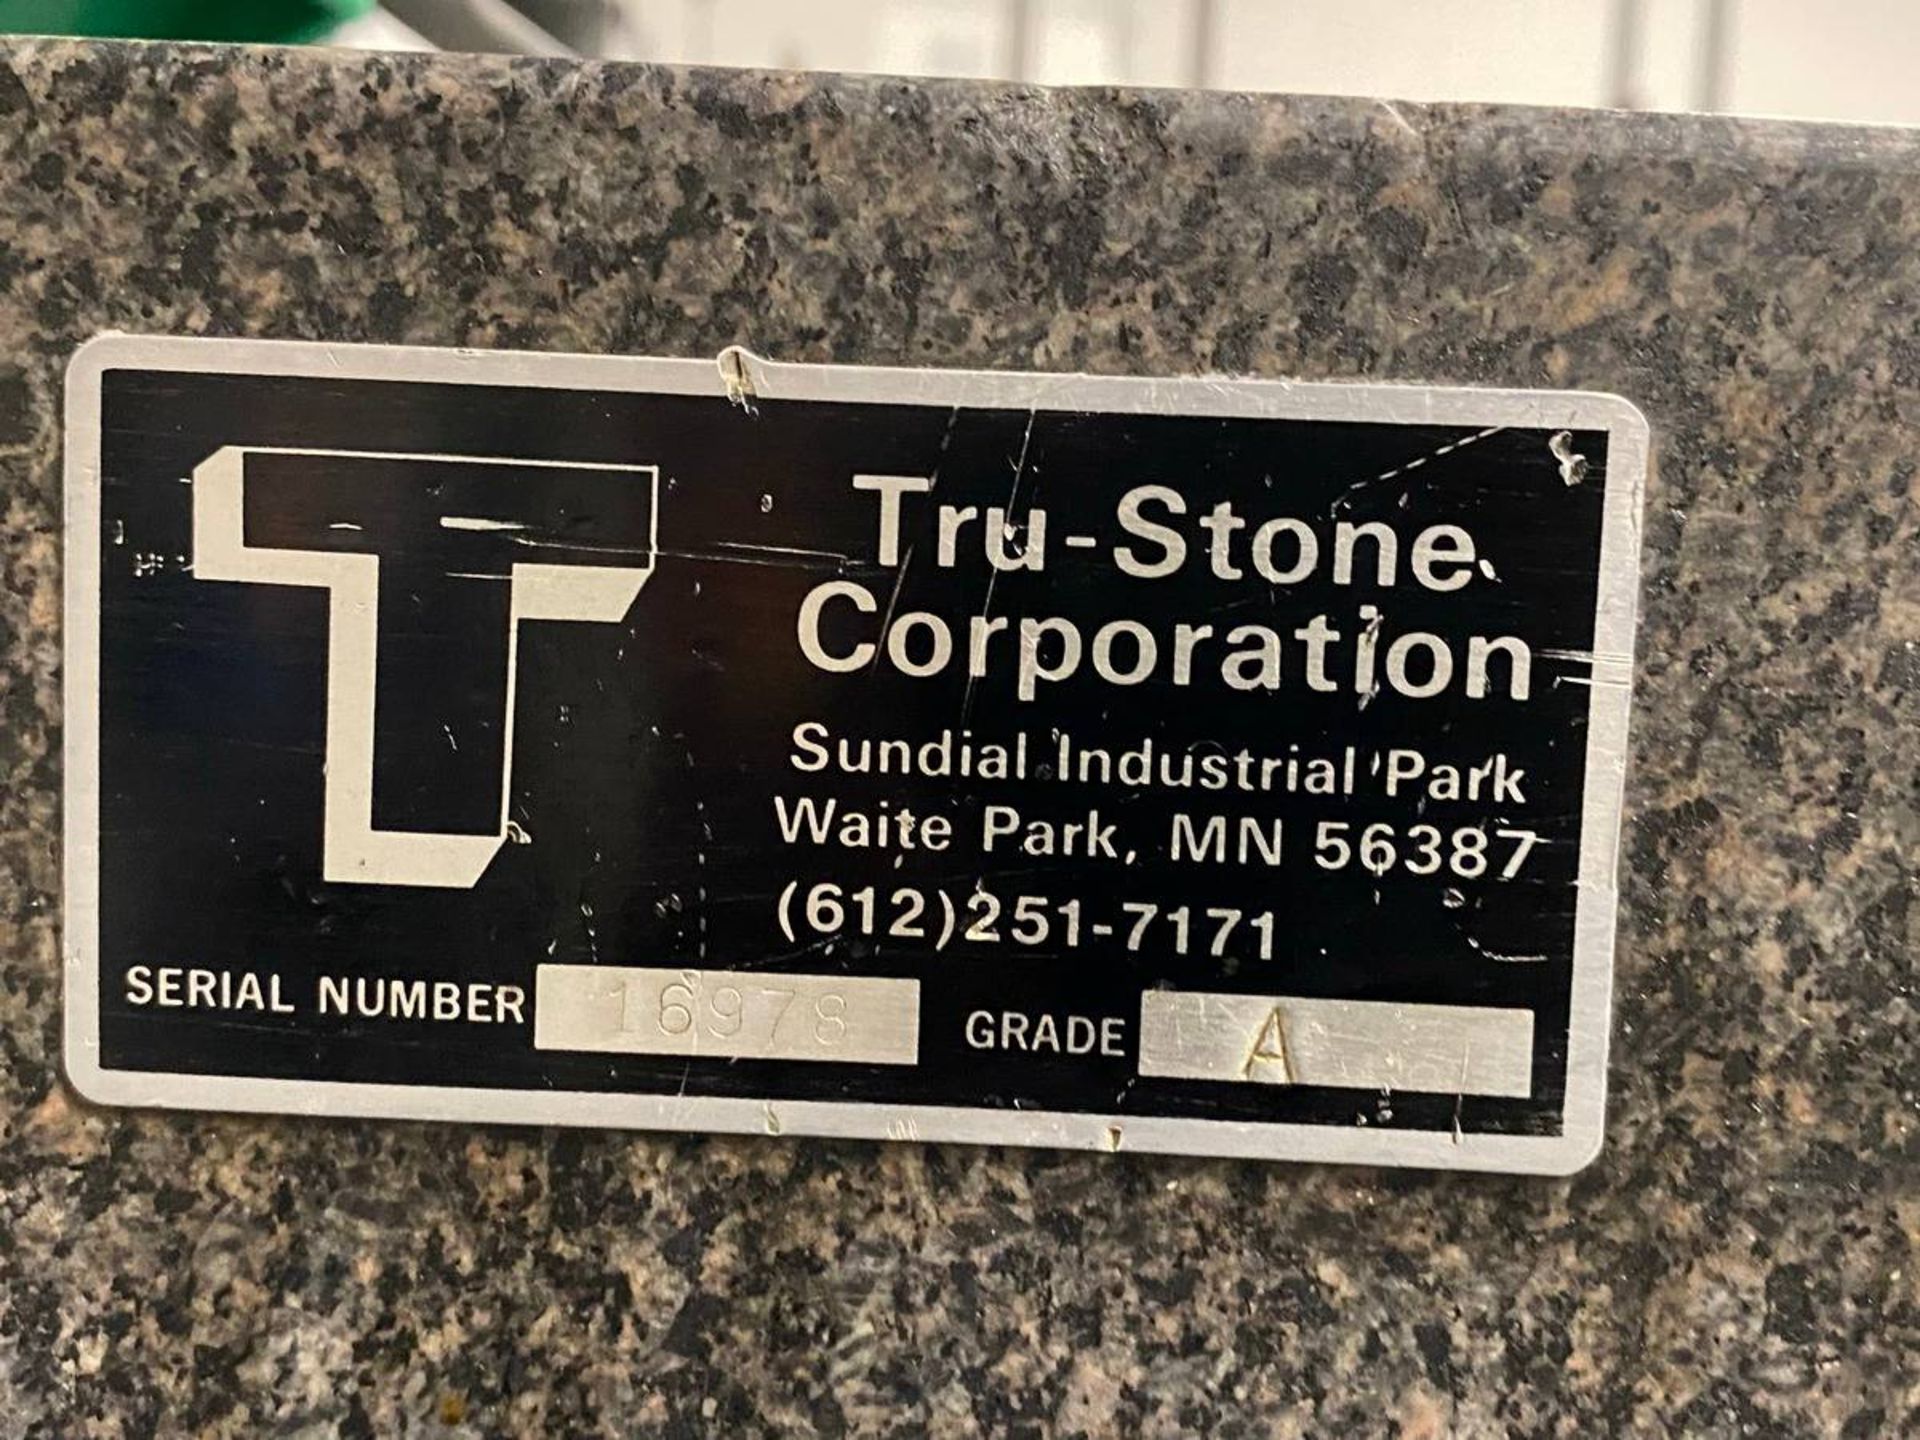 True-Stone Grade A 36'' W x 60'' L x 8'' Thick Granite Surface Plate - Image 3 of 3